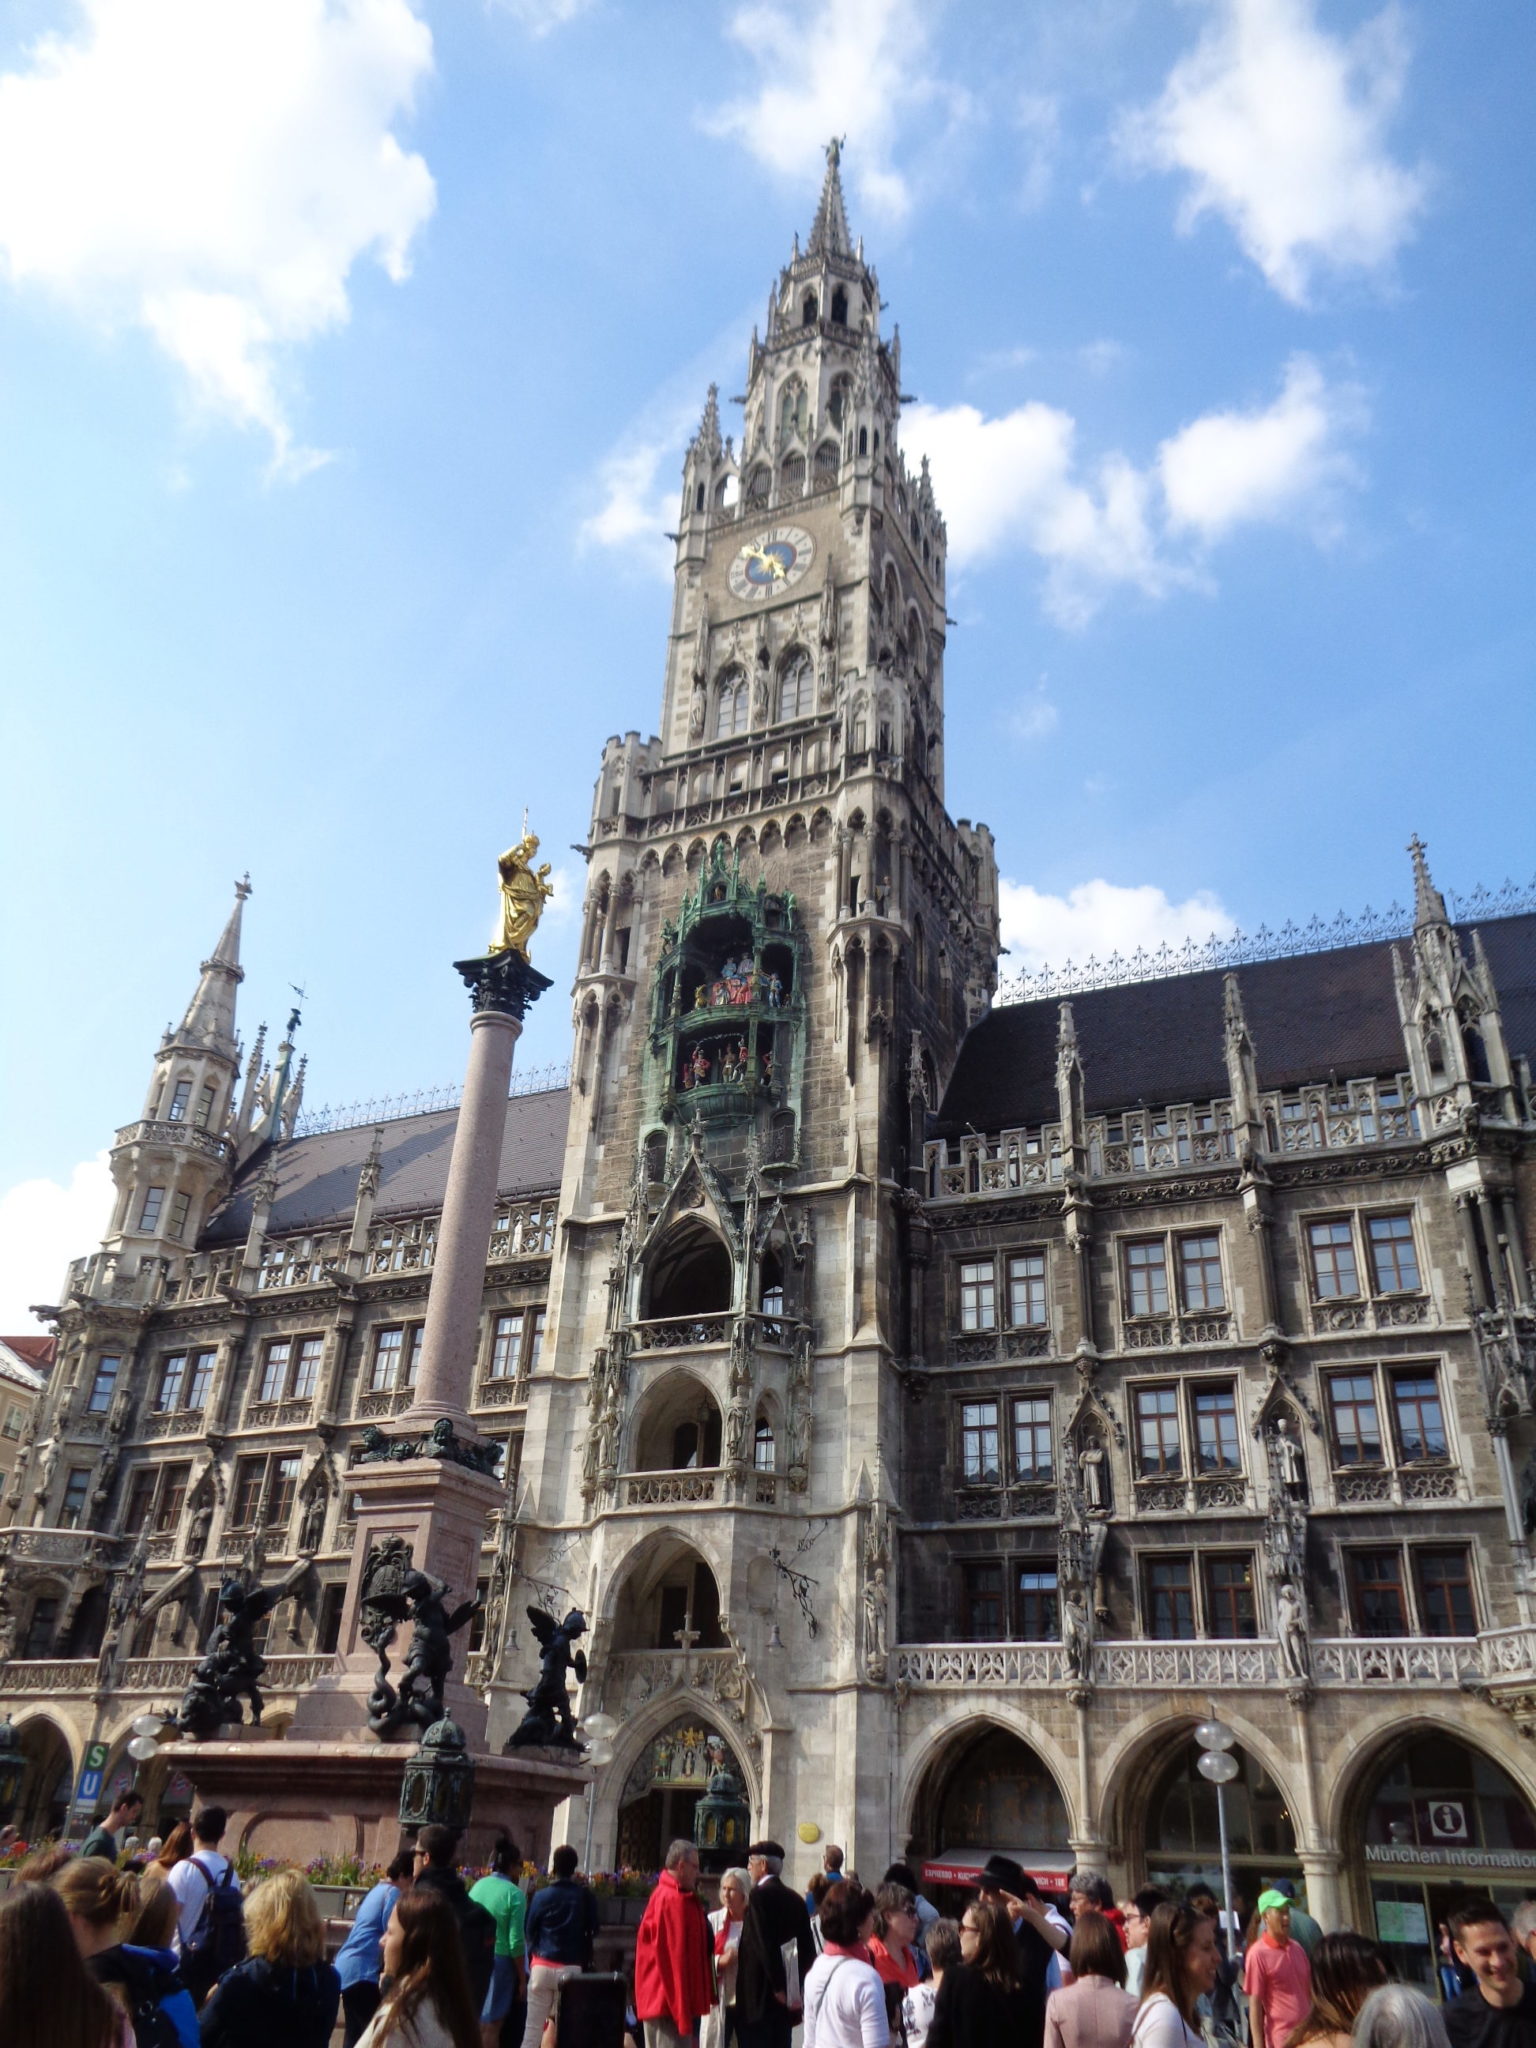 Neues Rathaus - Top 10 Things to See and Do in Munich, Germany